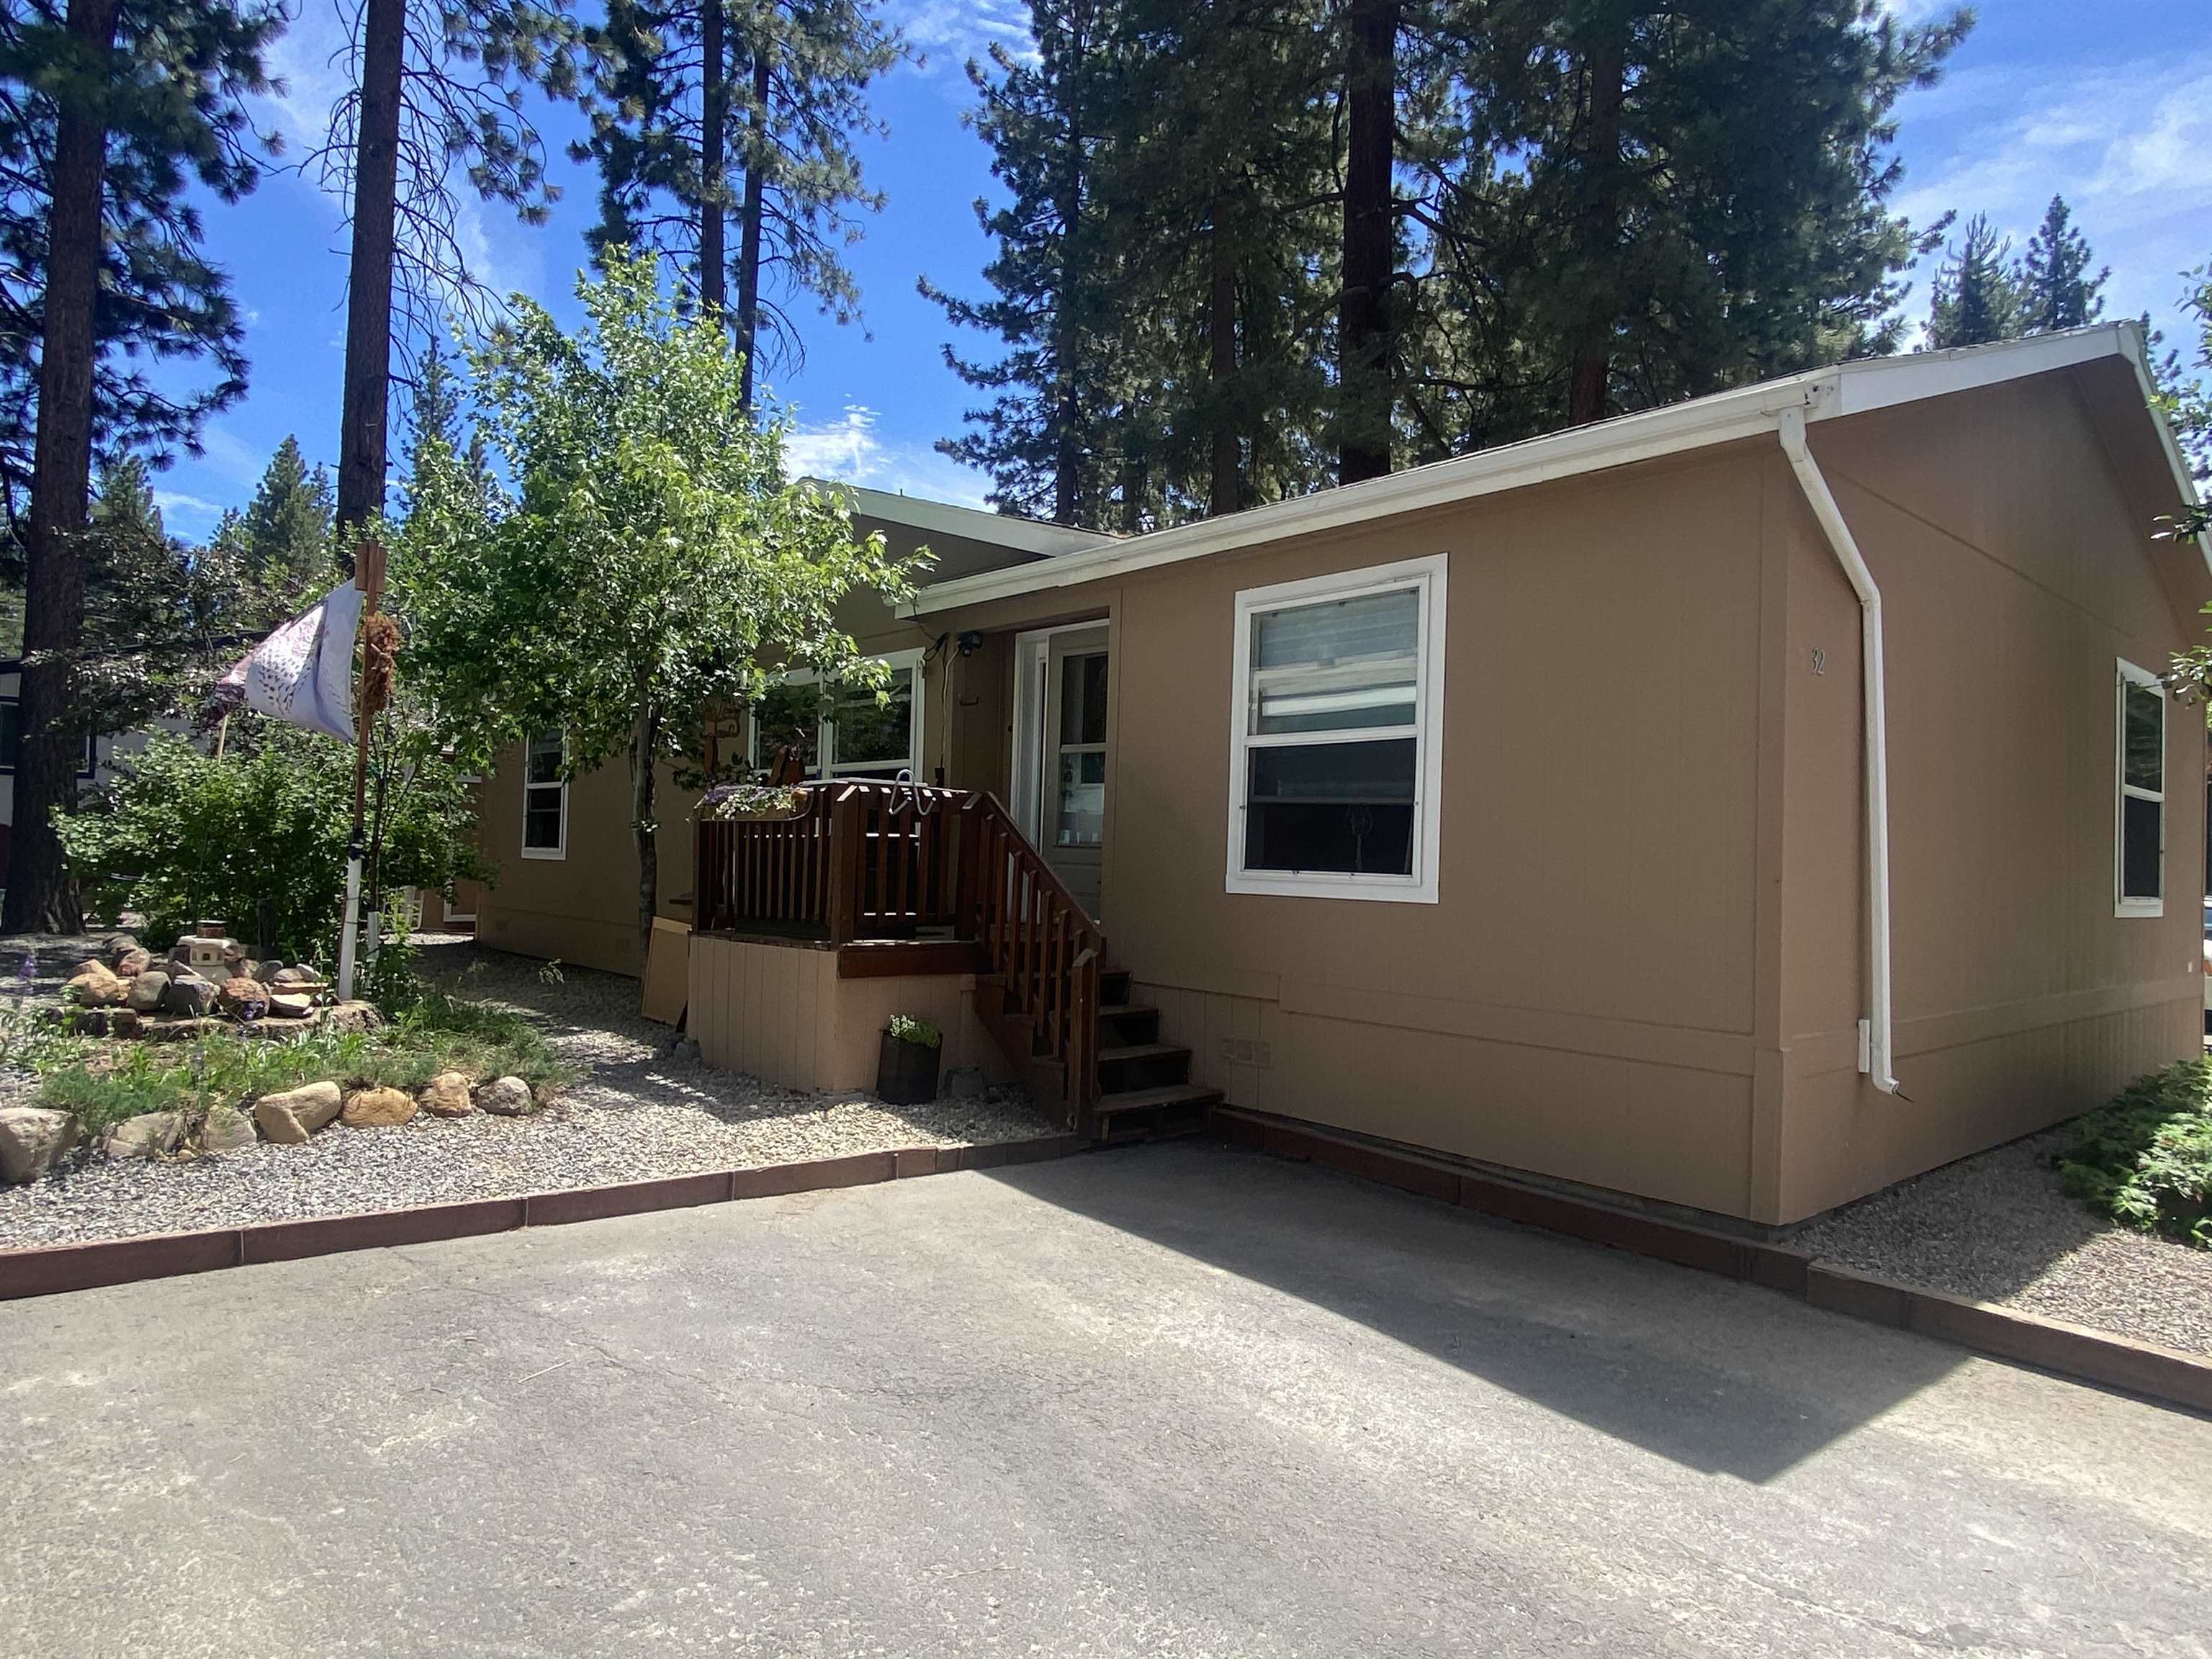 Image for 10100 #32 Pioneer Trail, Truckee, CA 96161-2951